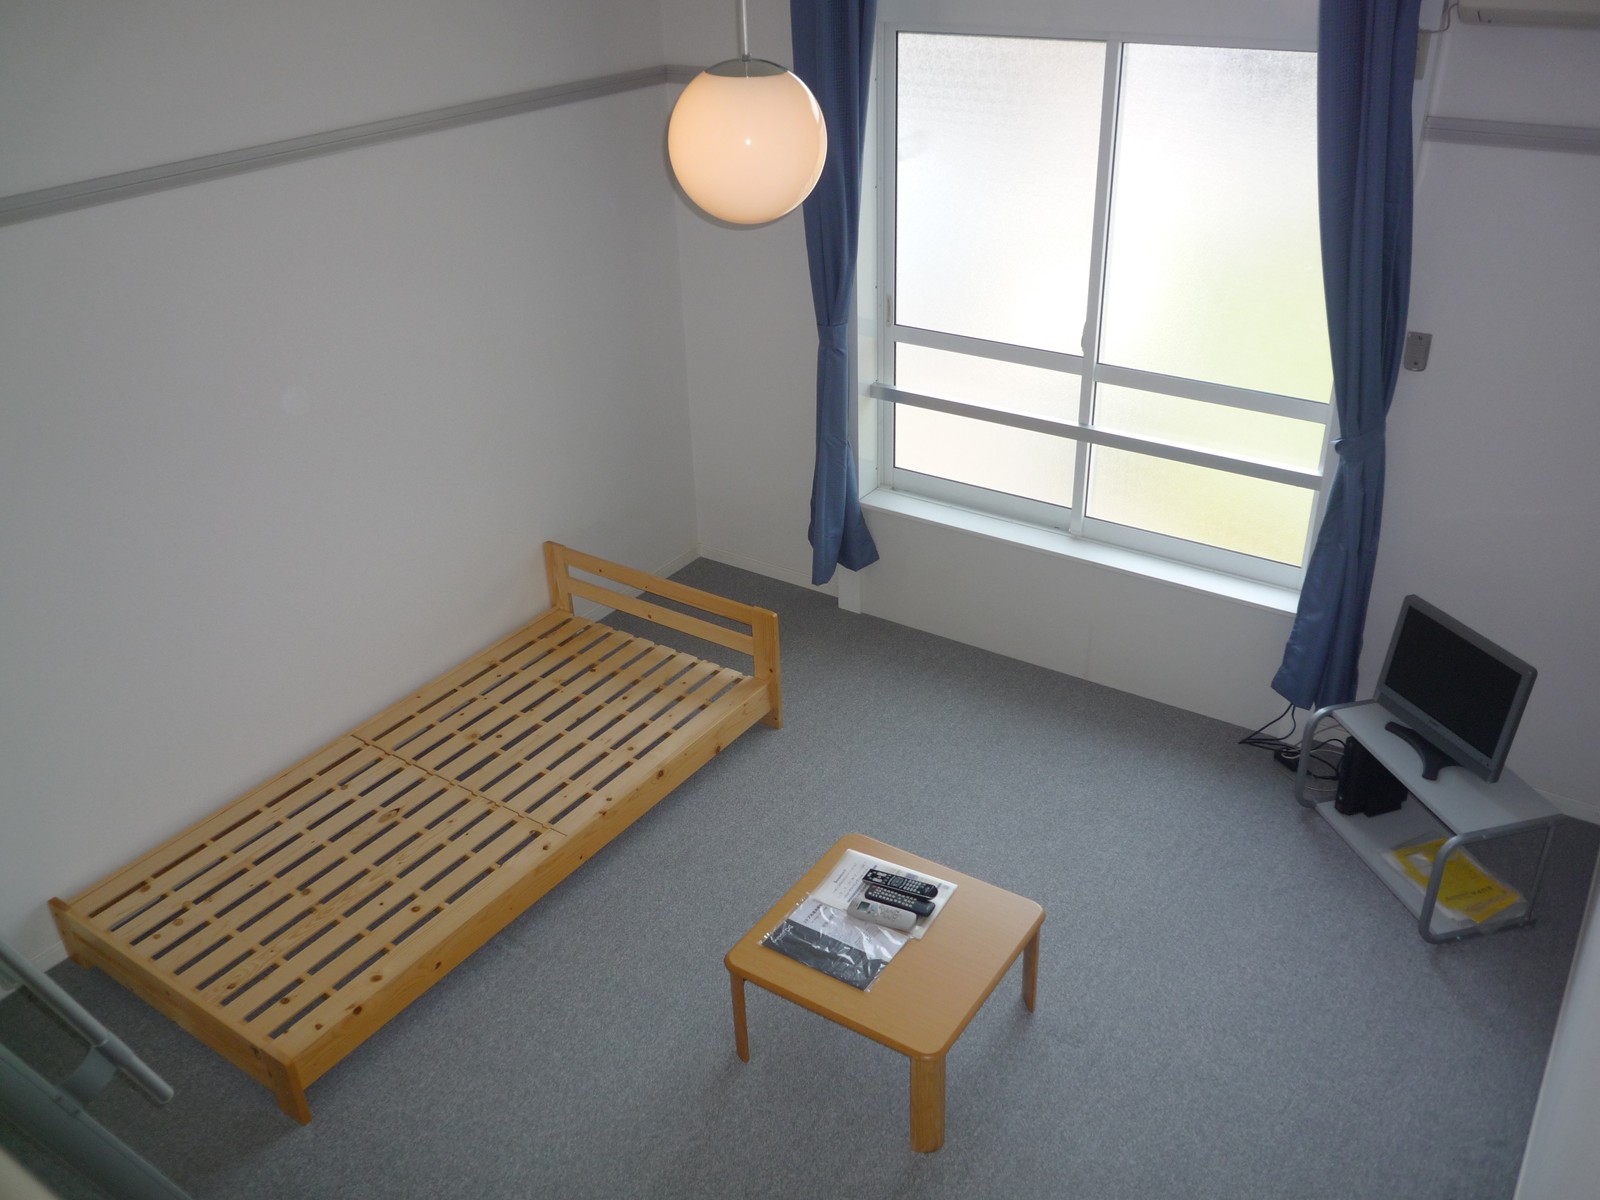 Living and room. TV ・ Air conditioning ・ Wooden frame bed ・ With table ※ Different specifications in the room